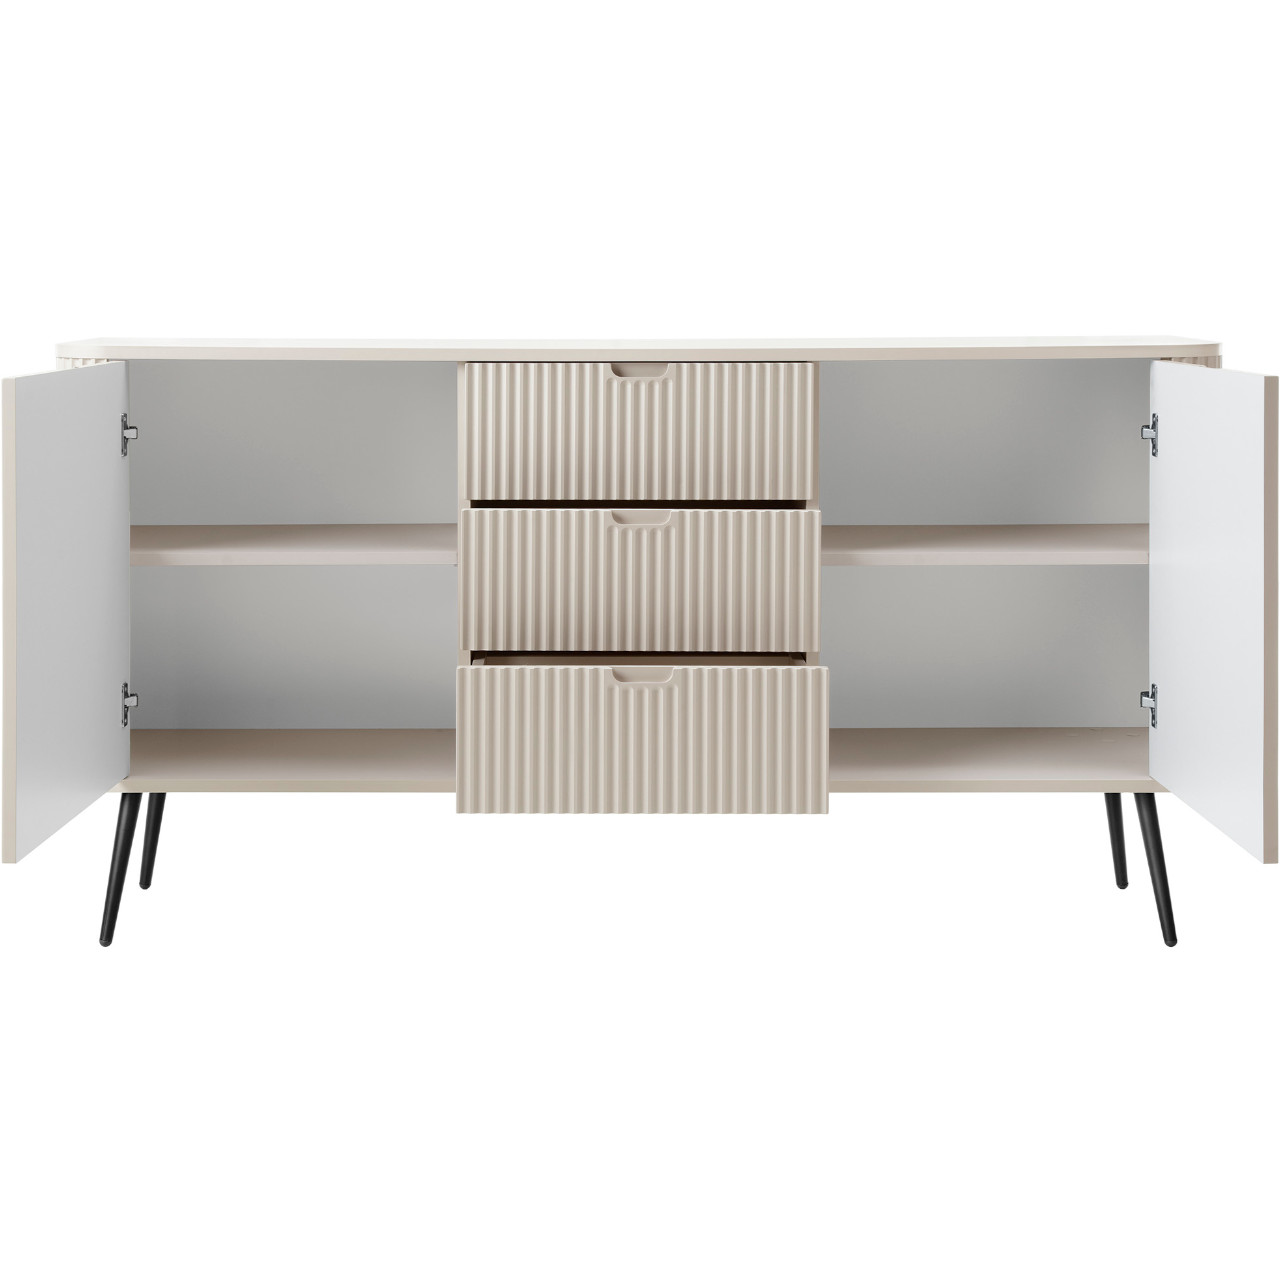 Chest of drawers ZOVI 02 cashmere / black